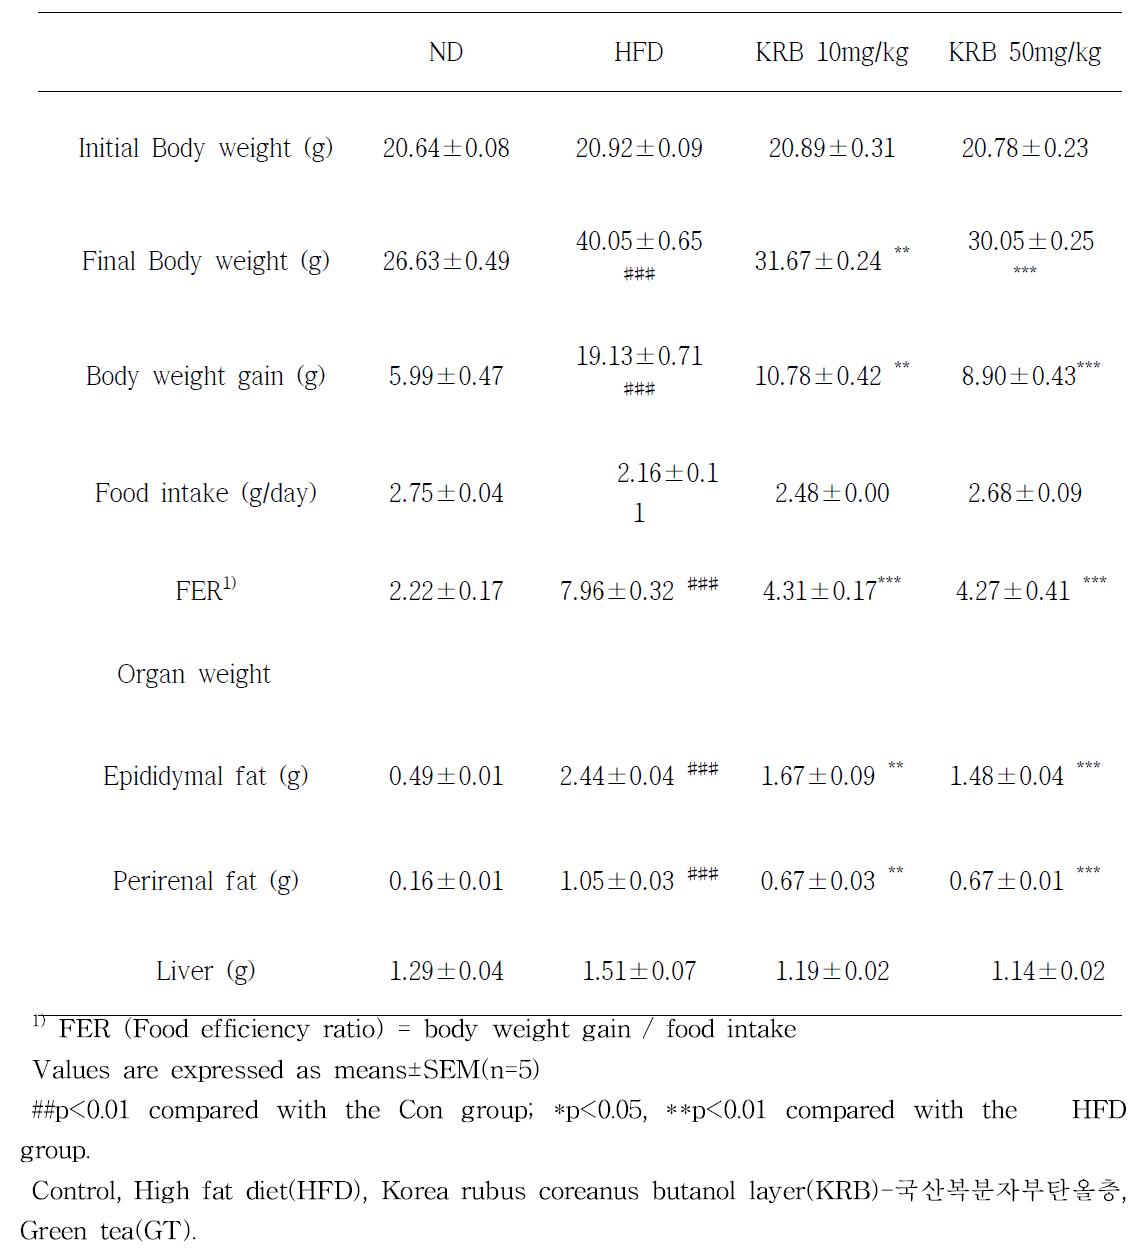 The effects of KRB on body weight and food intake in HFD-fed obese mice (60 days)